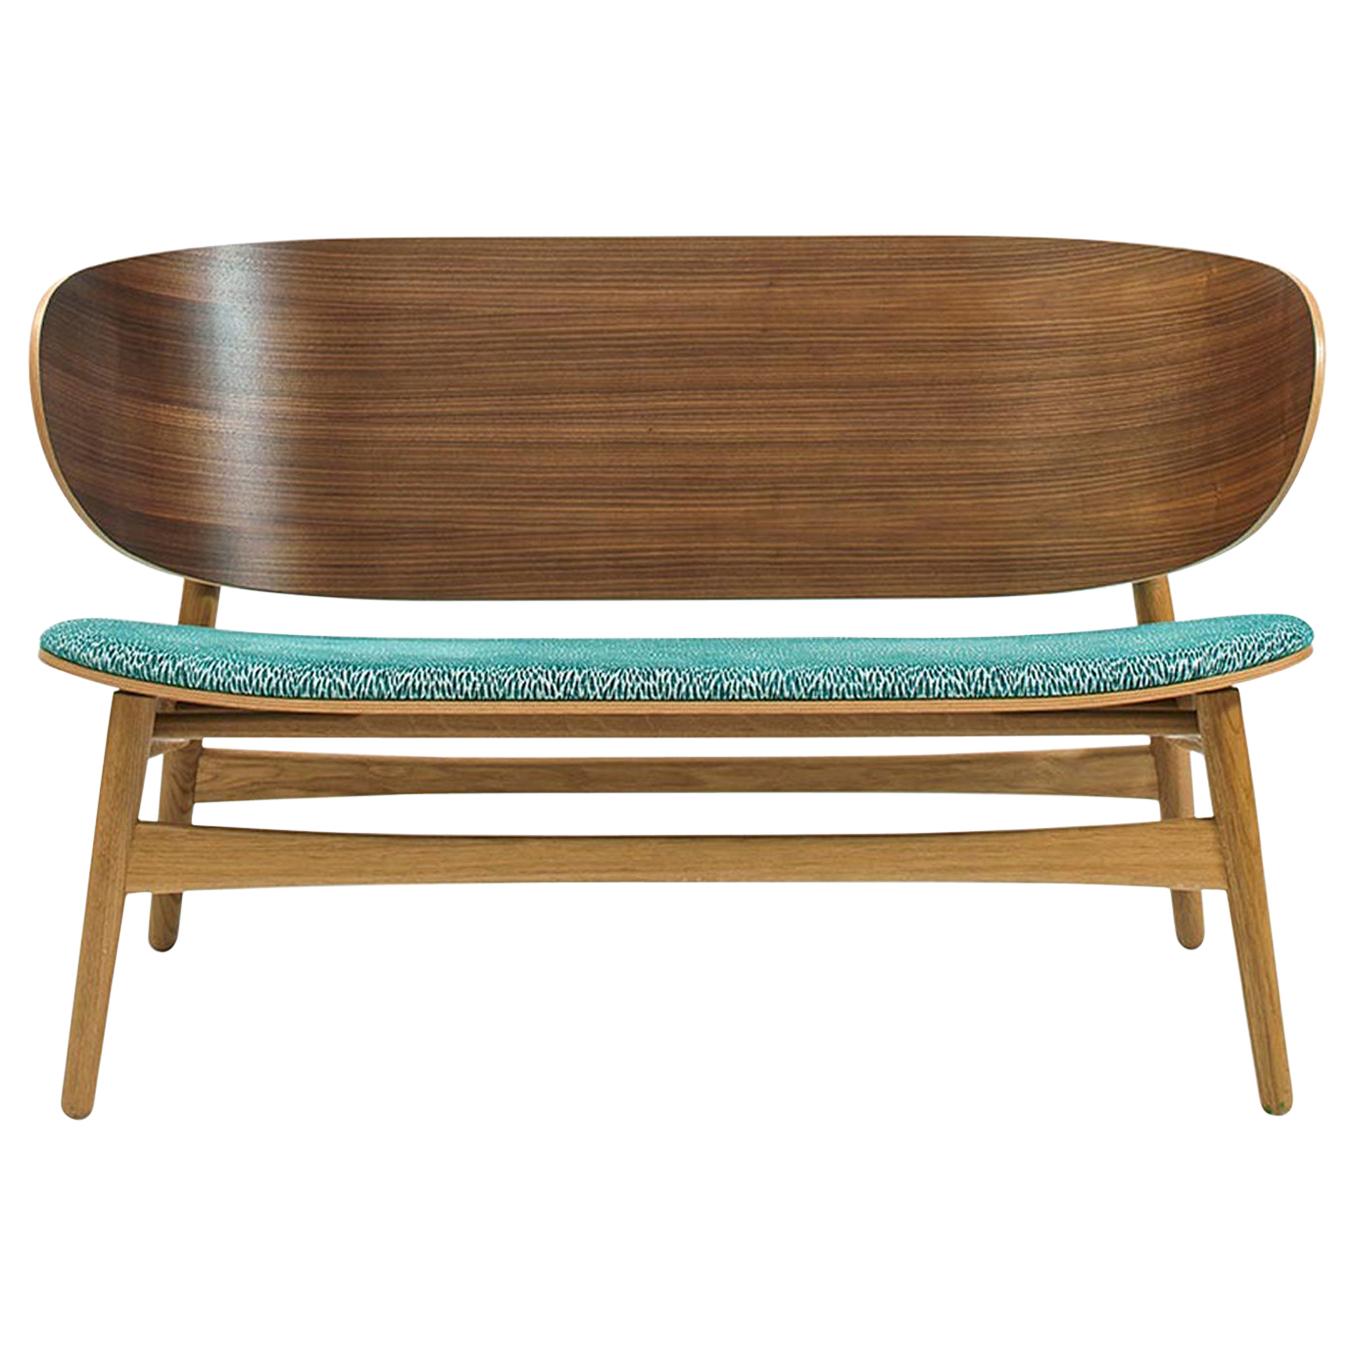 Hans Wegner GE-1935 Bench with Upholstered Seat - Lacquered Walnut For Sale